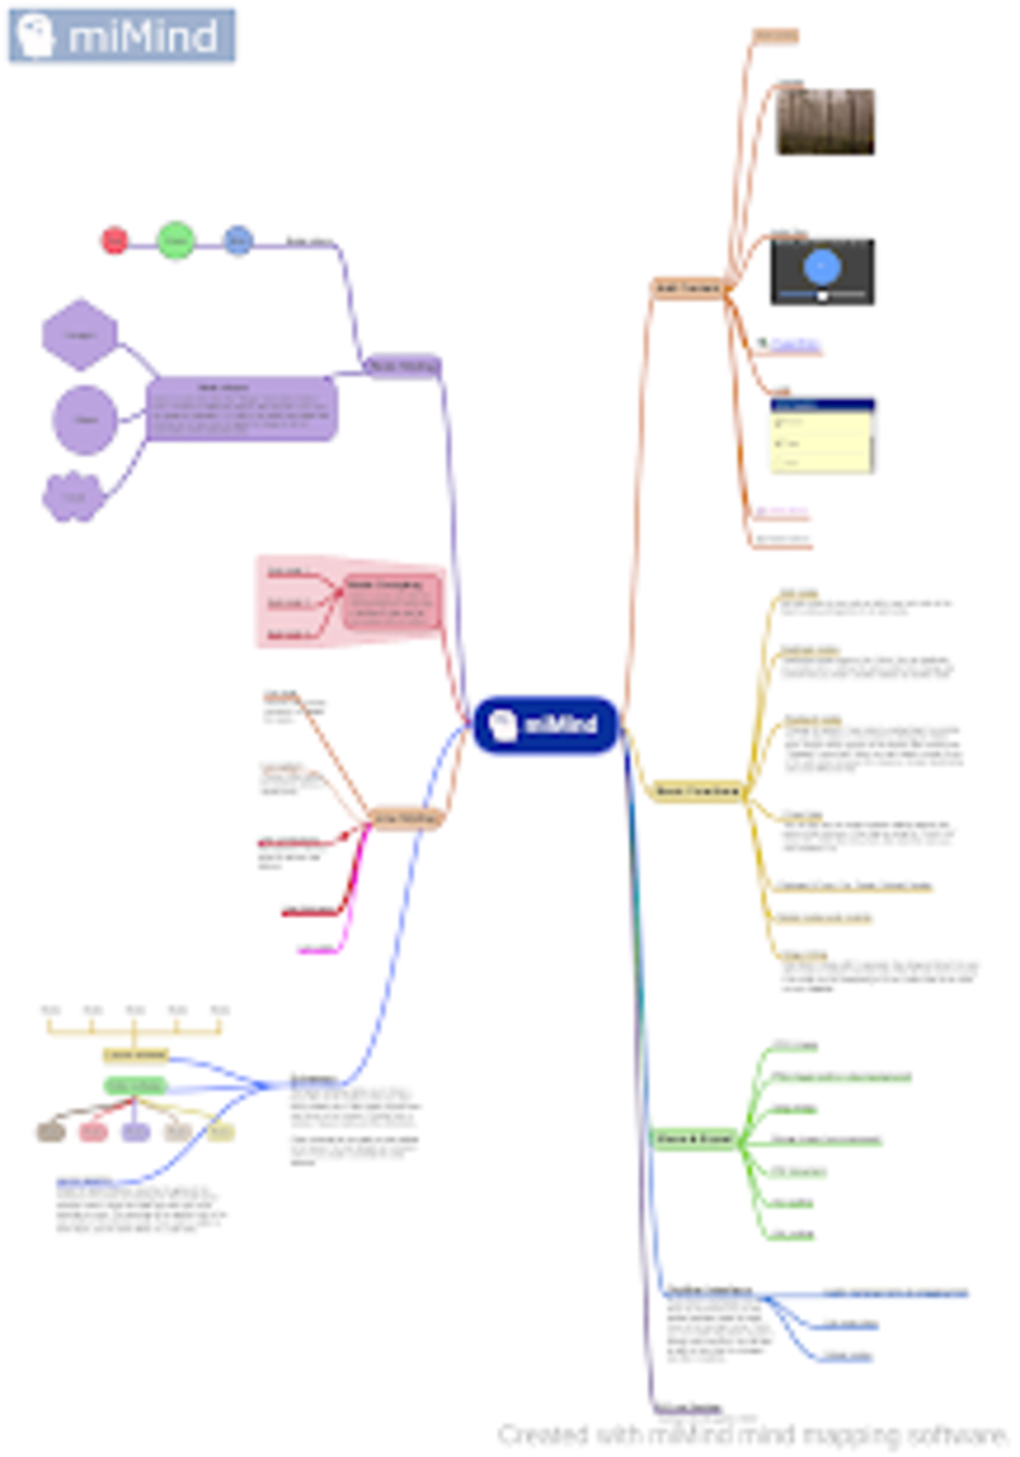 miMind Easy Mind Mapping APK para Android Descargar